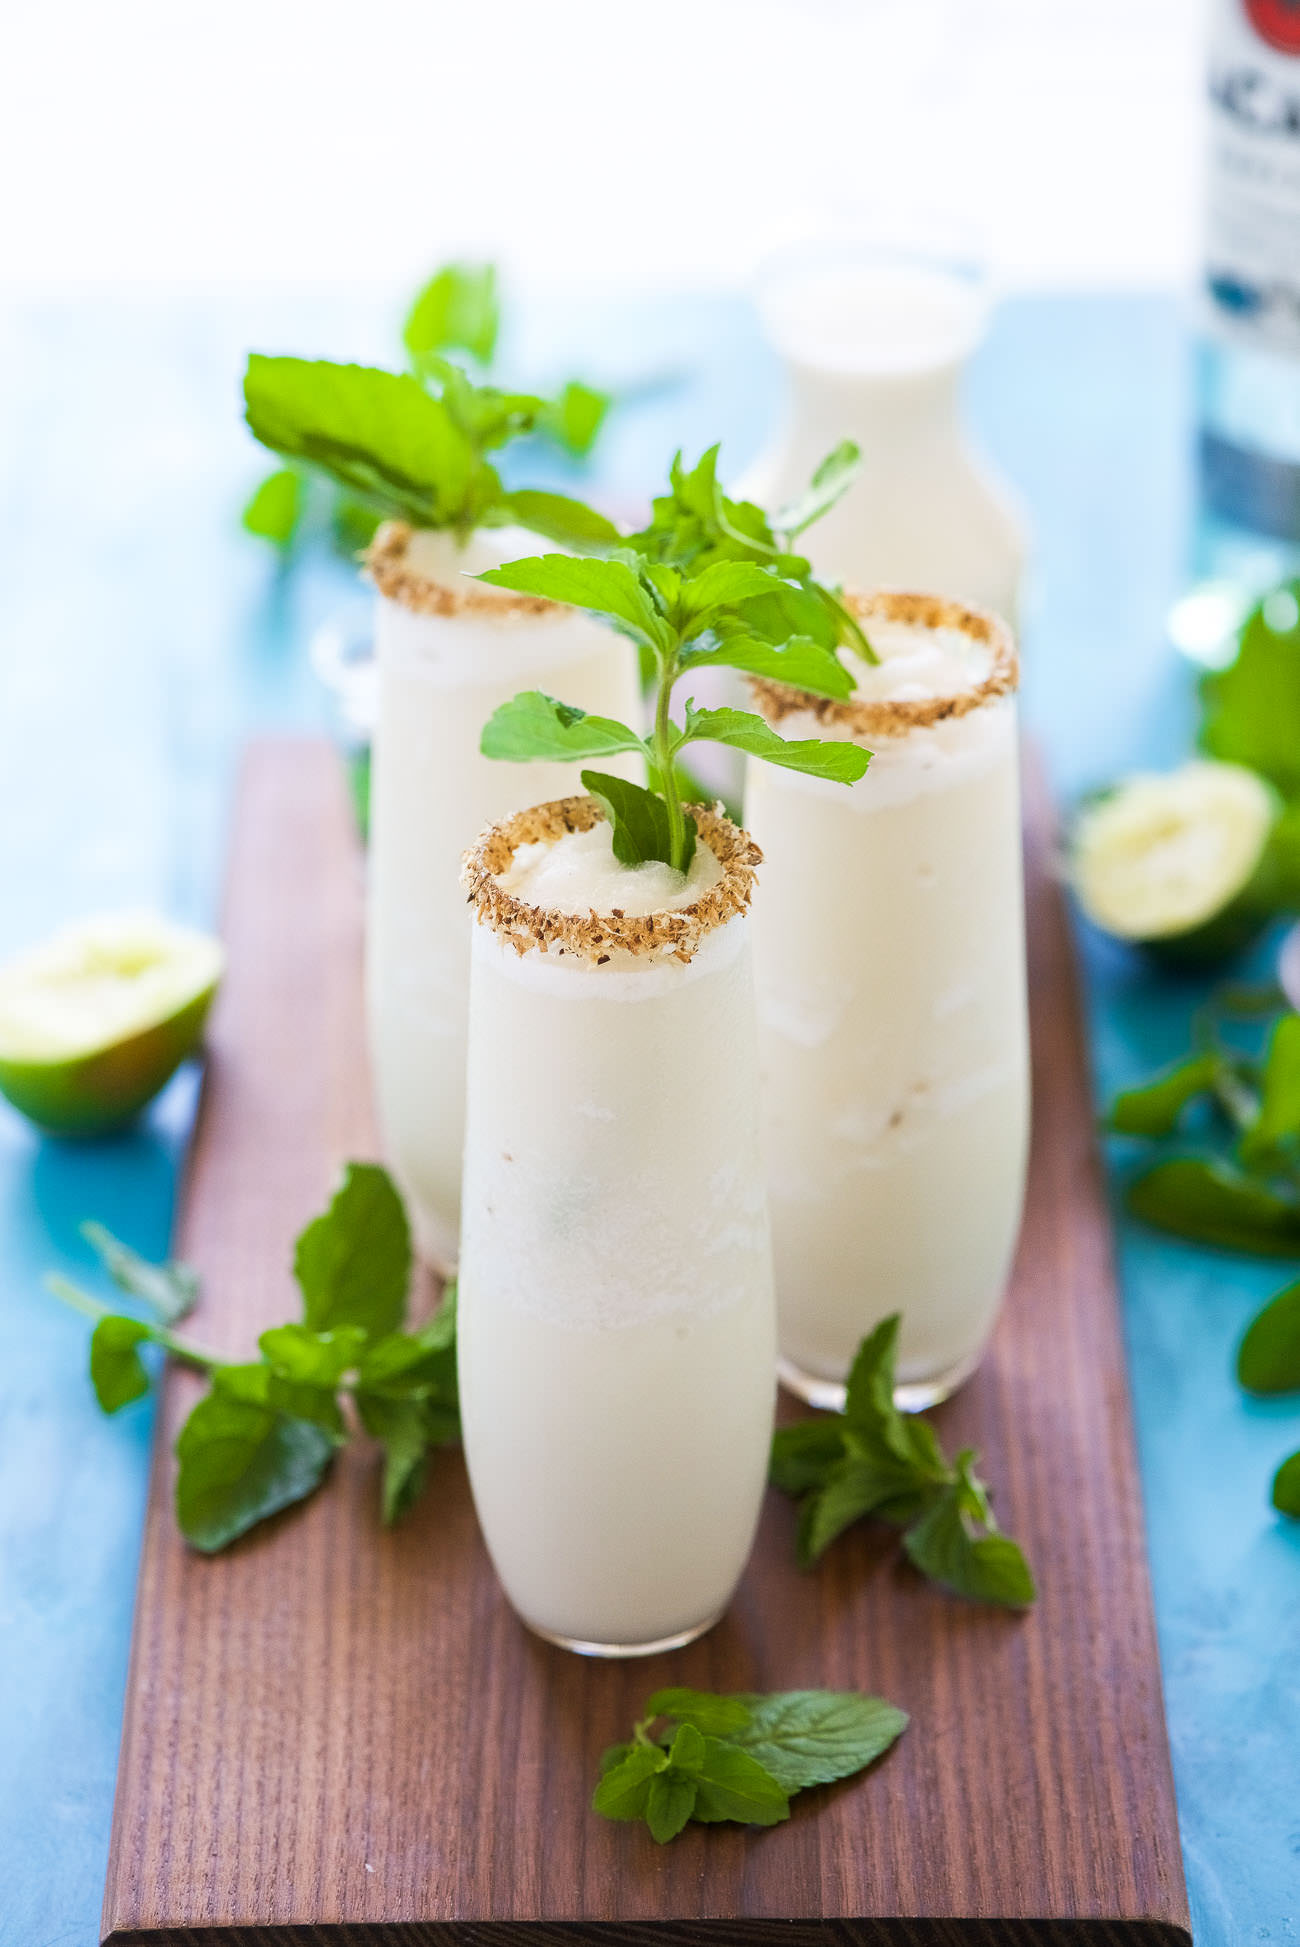 This Toasted Frozen Coconut Mojito is a summer must have! Made lighter with fresh lime juice, a mint simple syrup, and then blended with coconut milk for a refreshing cocktail that you won't have trouble asking for seconds!